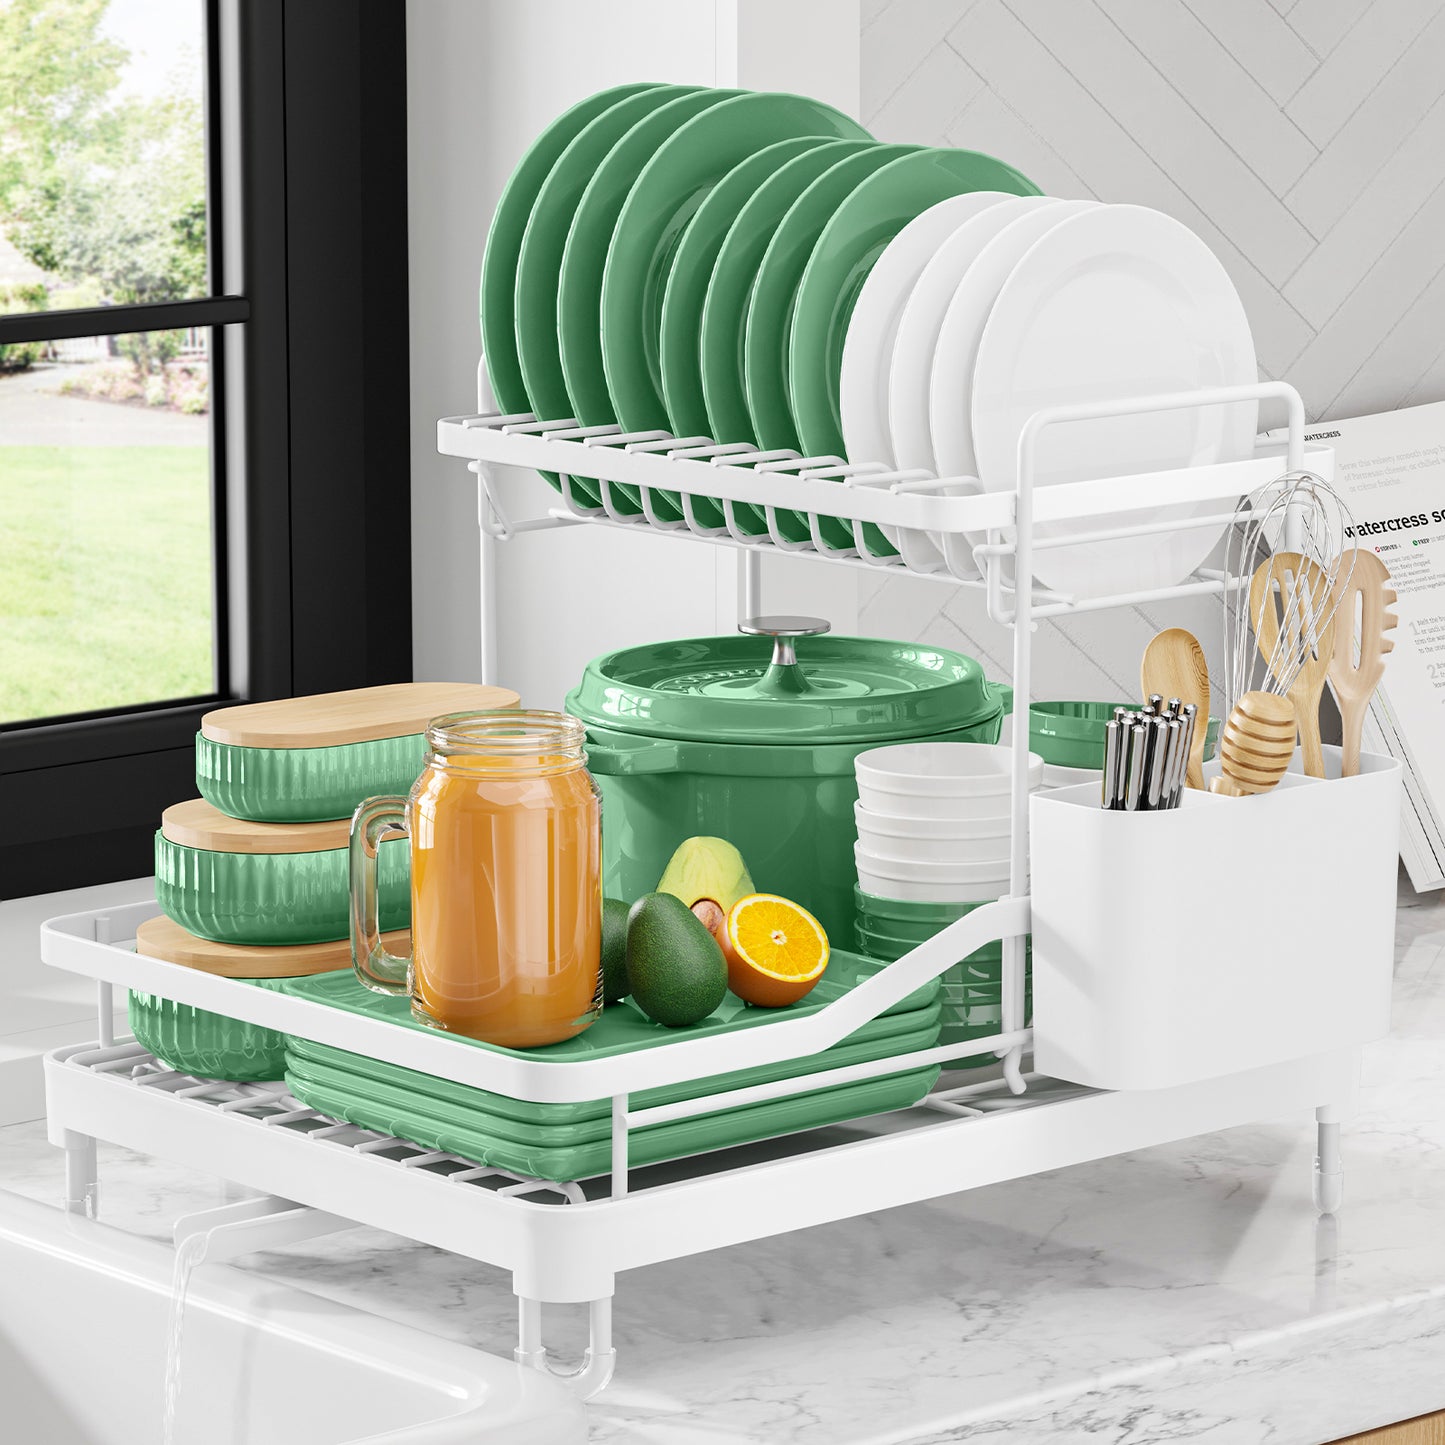 Kitsure Dish Drying Rack - Dish Racks for Kitchen Counter, 2-Tier Dish Rack w/a Cutlery Holder, Compact Dish Drainers for Kitchen Counter, Stainless Drying Rack for Kitchen（4033）